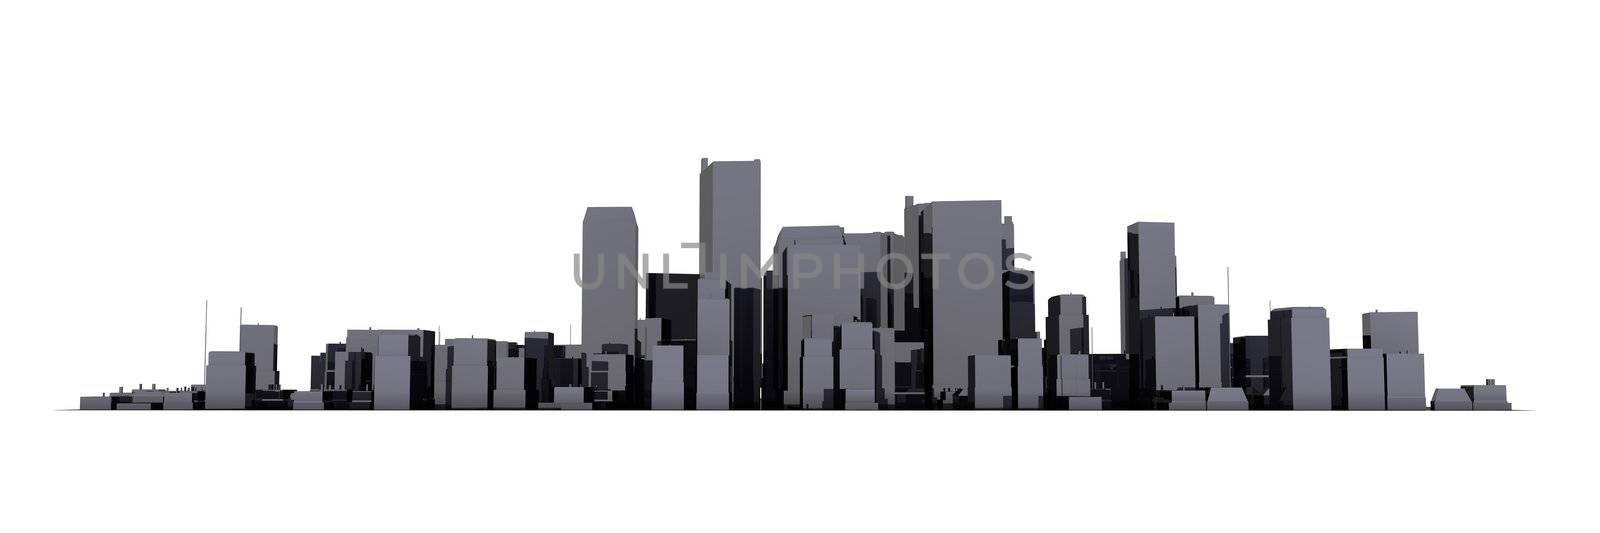 wide 3D cityscape model in shiny black with a white background - buildings are casting no shadows